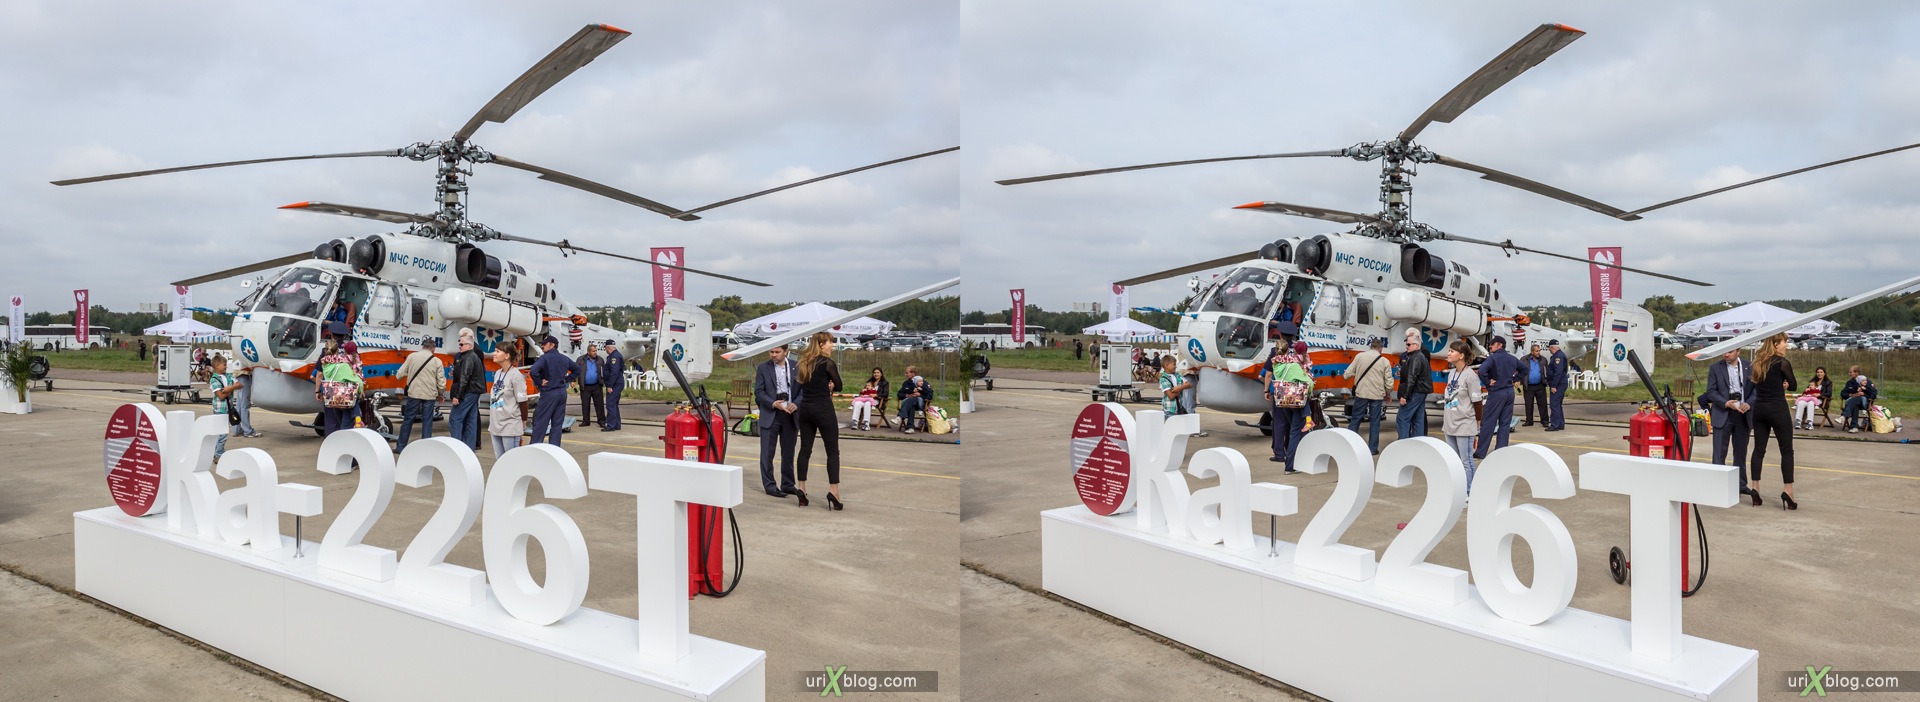 2013, MAKS, International Aviation and Space Salon, Russia, Ramenskoye airfield, Ka-32A11VS, helicopter, 3D, stereo pair, cross-eyed, crossview, cross view stereo pair, stereoscopic